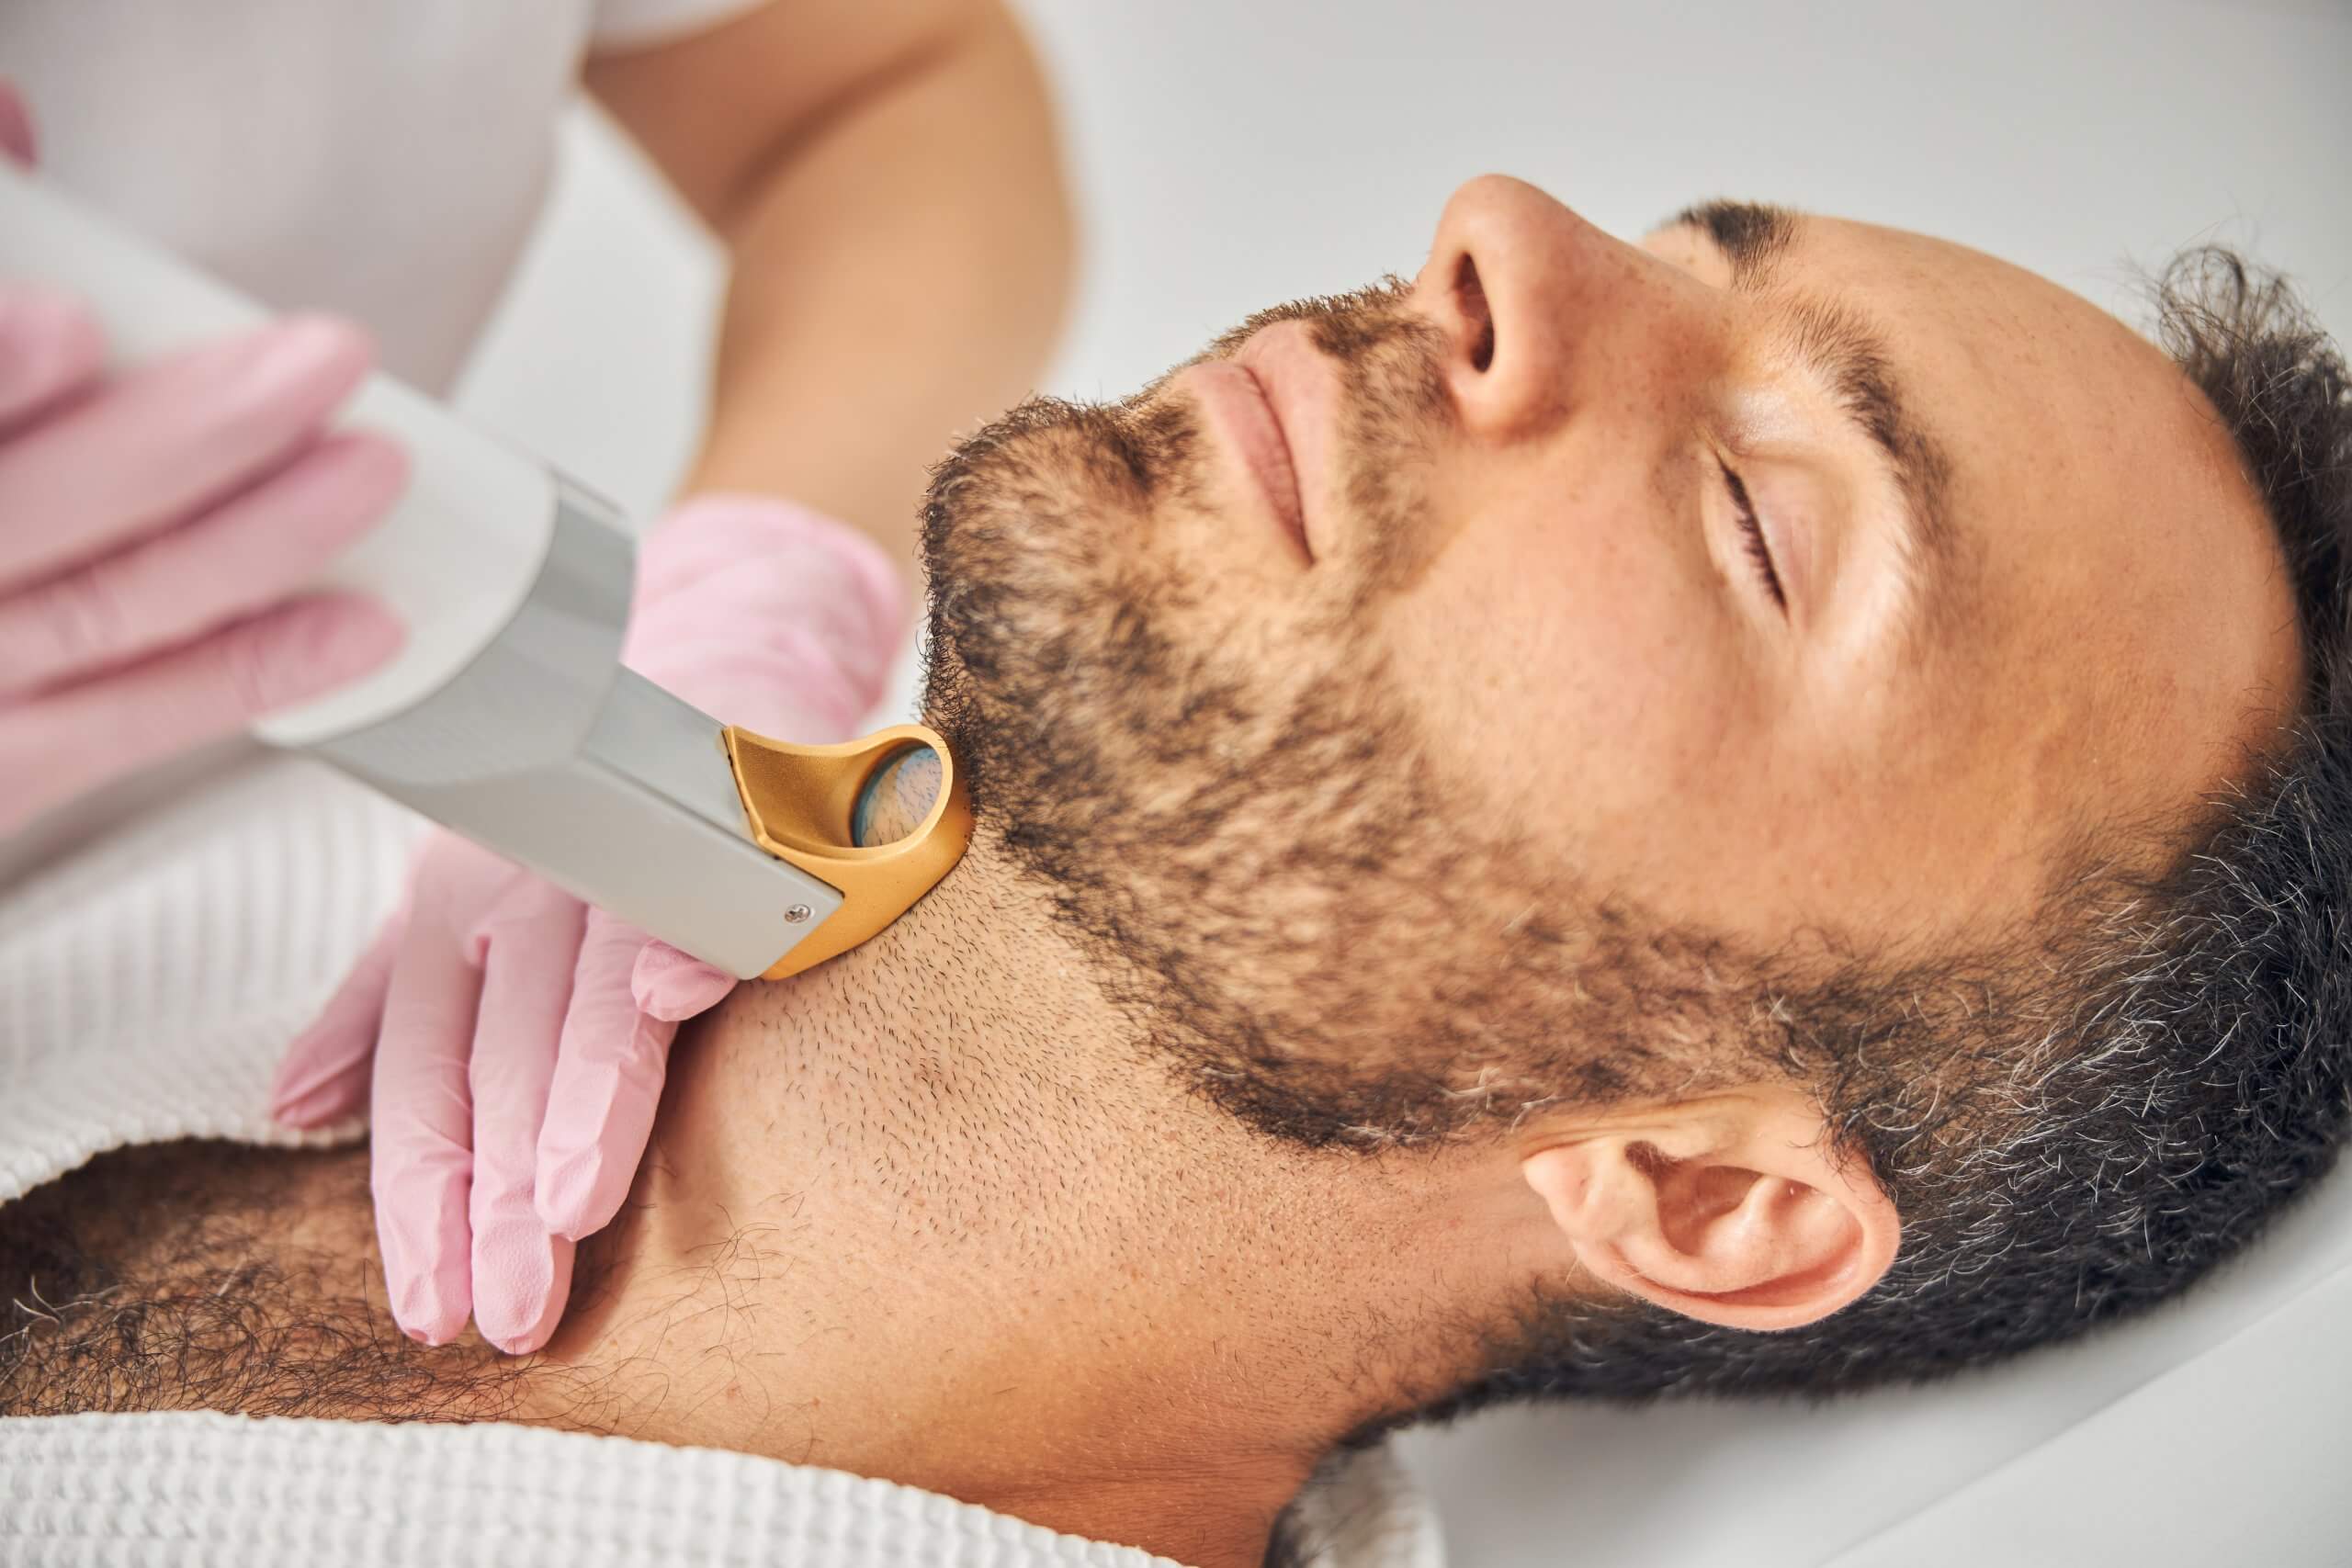 laser hair removal classes in Illinois allow laser hair removal technicians to perform laser hair removal on various parts of the body